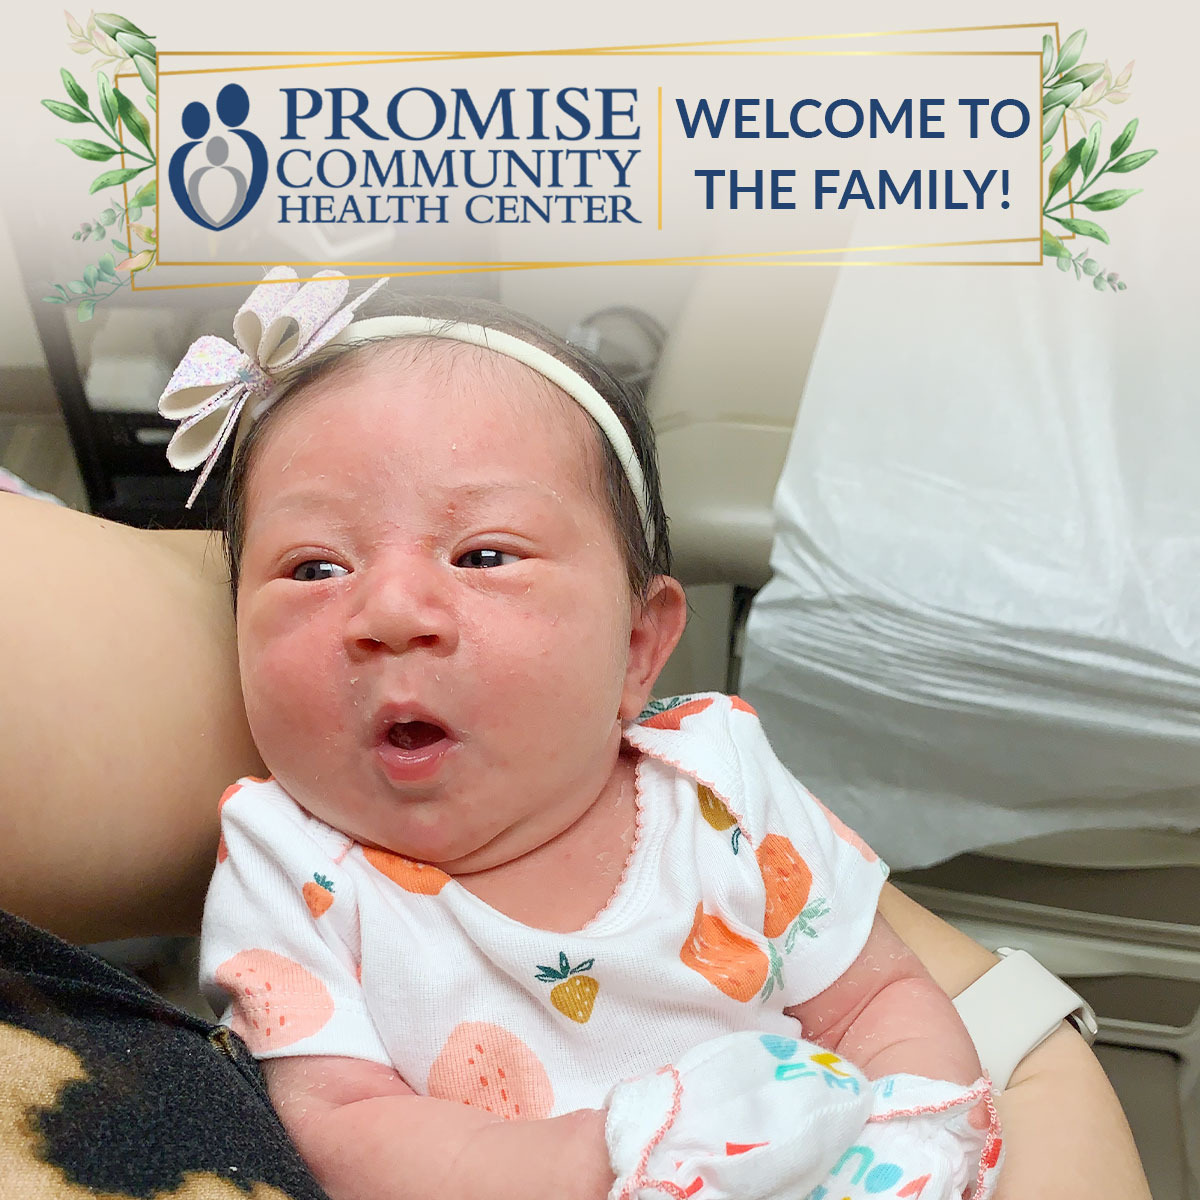 Hospital birth in Sioux Center, Iowa |Promise Community Health Center in Sioux Center, Iowa | Home births in northwest Iowa, Home births in southeast South Dakota, Home births in southwest Minnesota | Home births in Sioux Falls South Dakota, Home births in Beresford South Dakota, Home births in Sioux City IA, Home births in LeMars IA, Home births in Worthington MN, Home births in Iowa, Home births in South Dakota, Home births in Minnesota